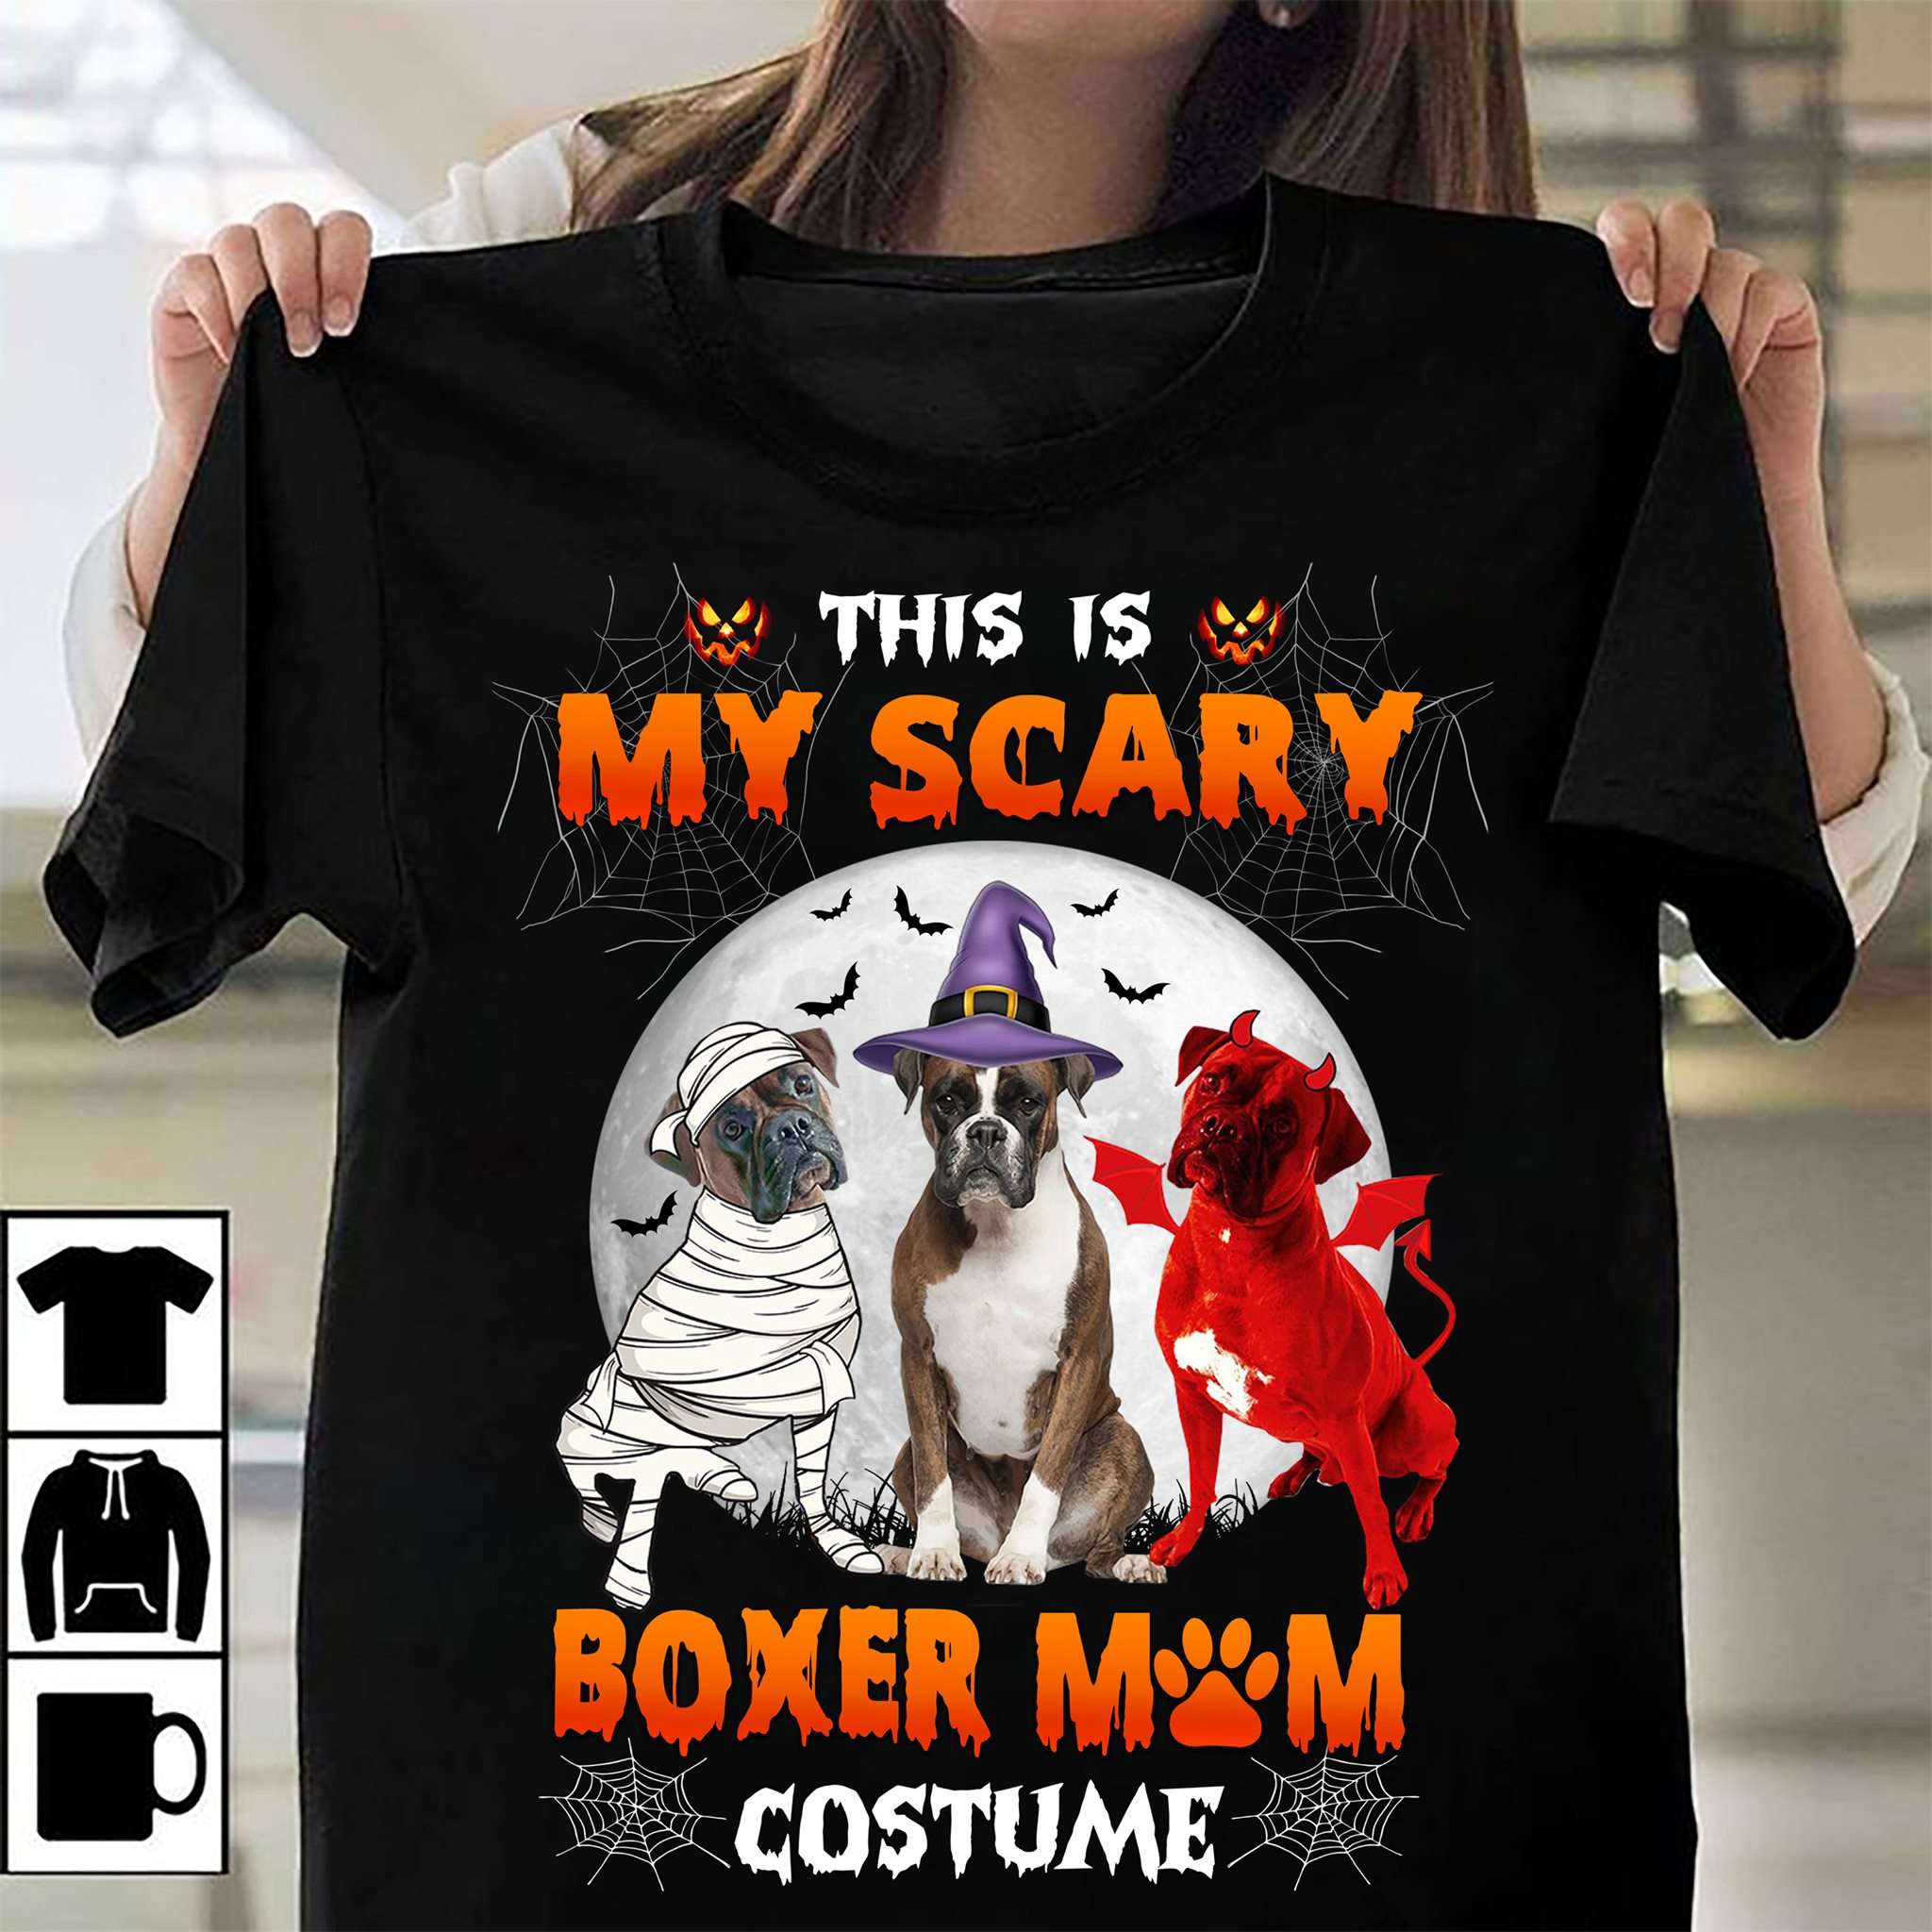 Witch Boxer, Halloween Costume - This is my scary boxer mom costume